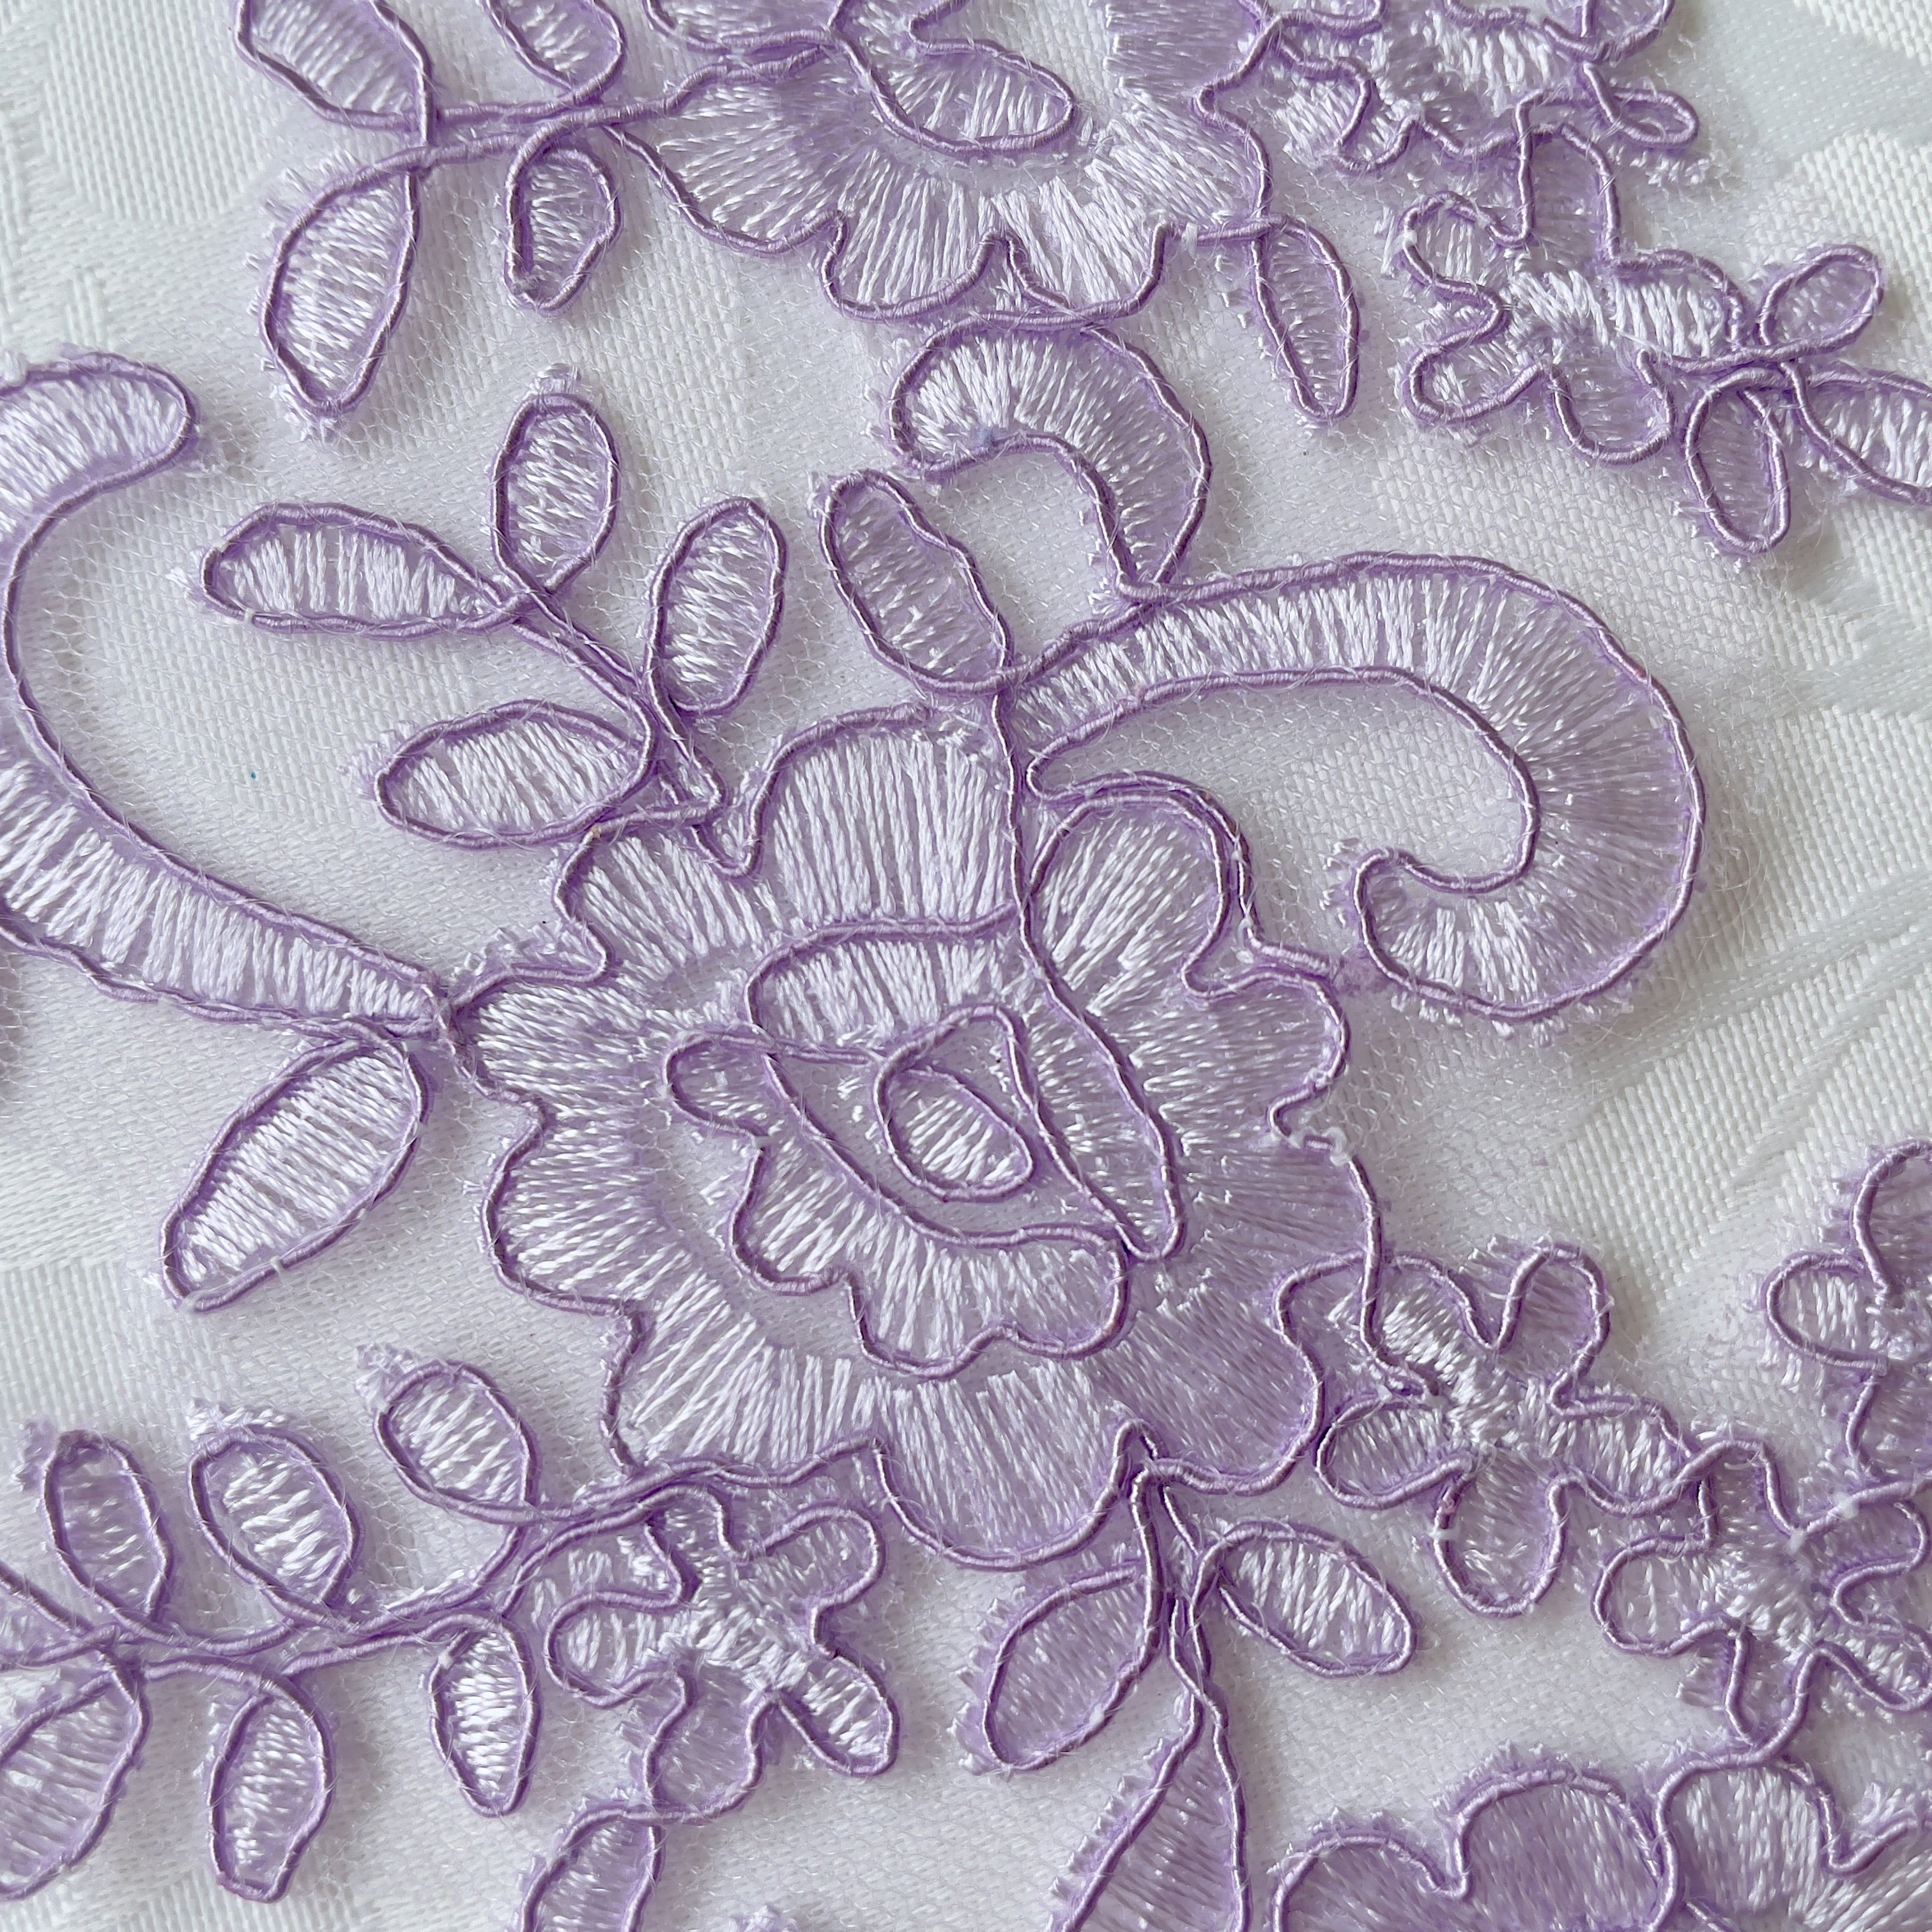 Lilac purple corded and embroidered floral applique pair perfect for adding crystals, beads and sequins.